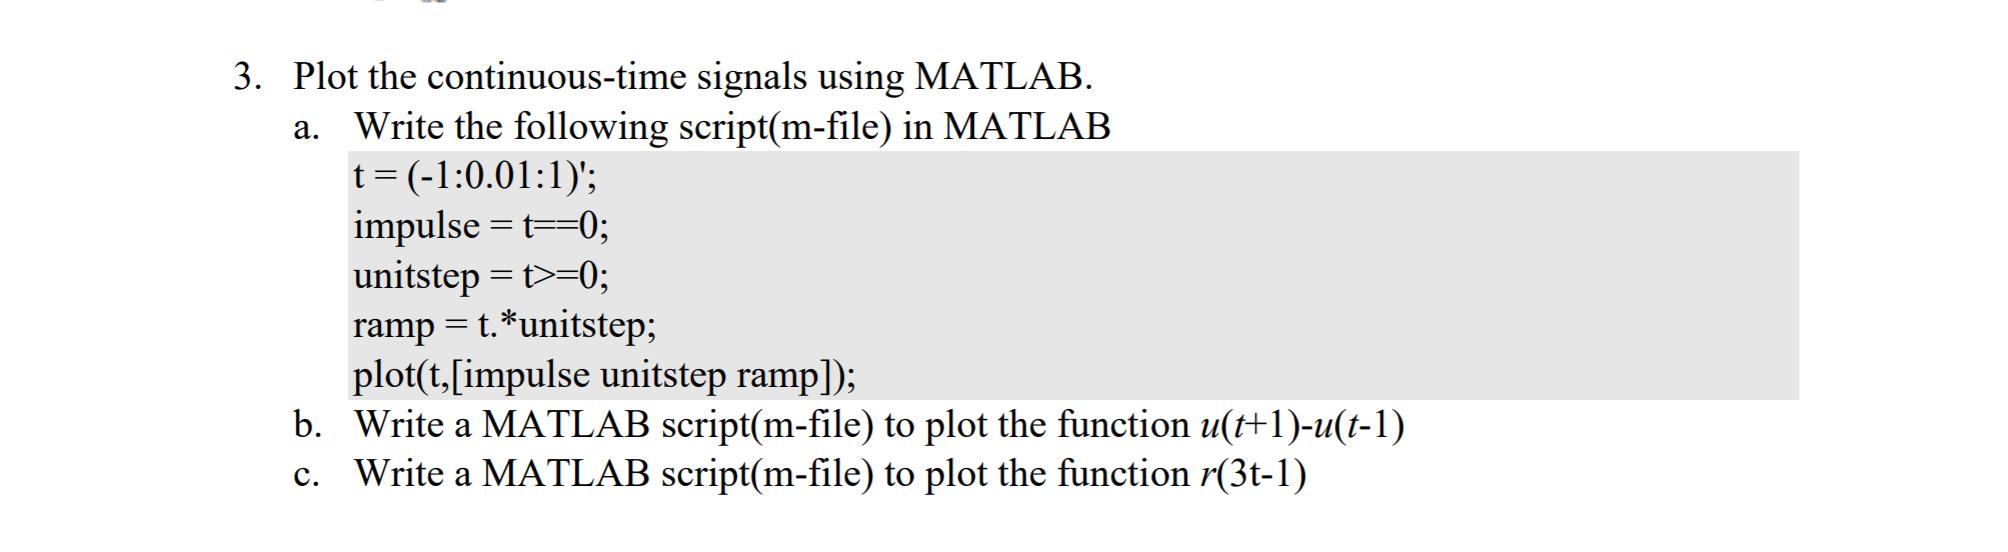 3. Plot the continuous-time signals using MATLAB. a. Write the following script(m-file) in MATLAB t =